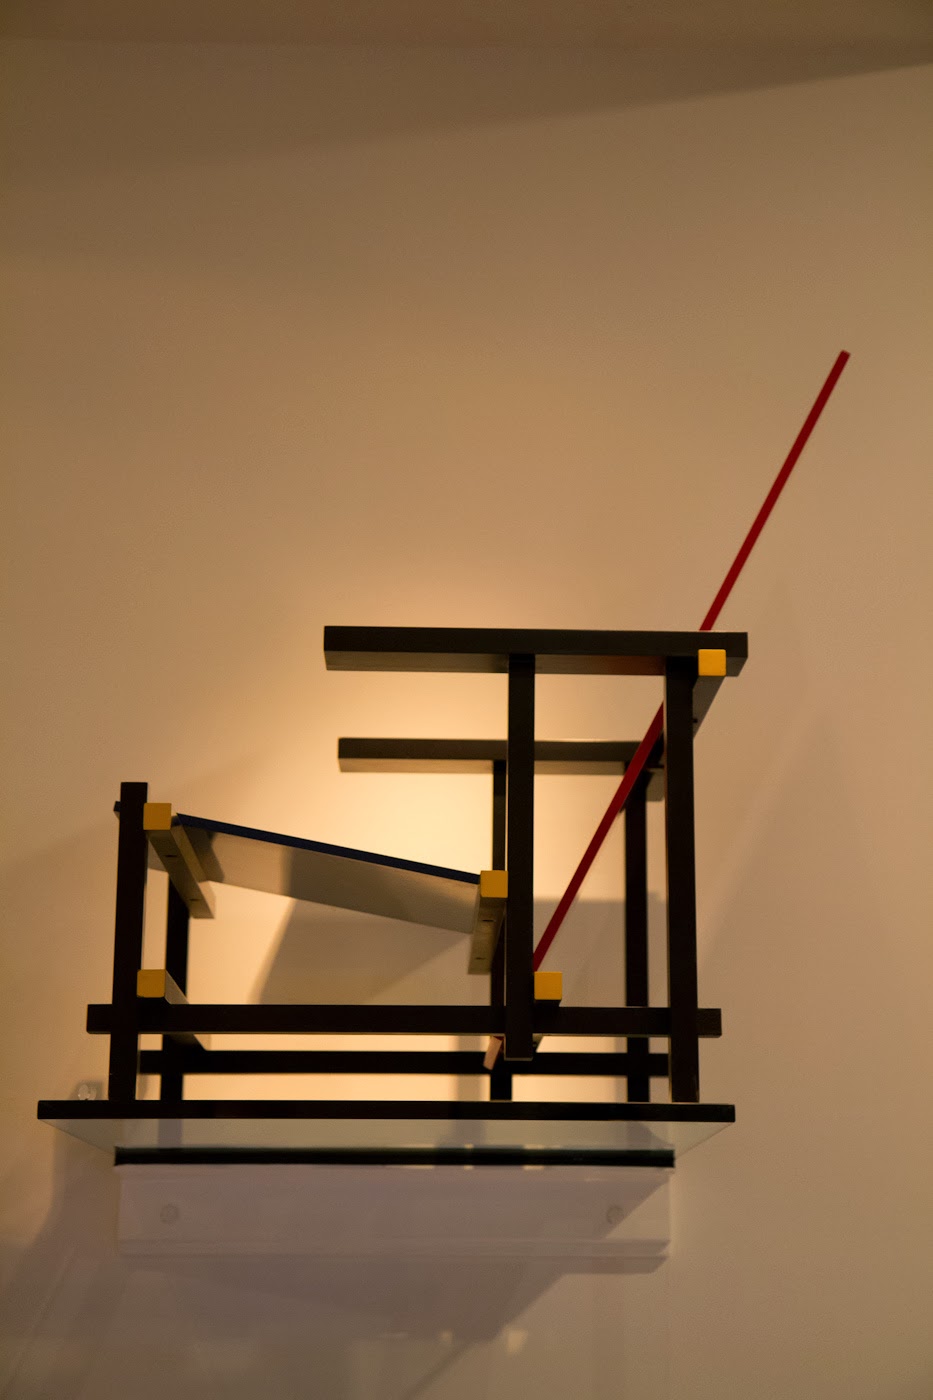 My favorite chair by Gerrit Rietveld "The red-blue chair"